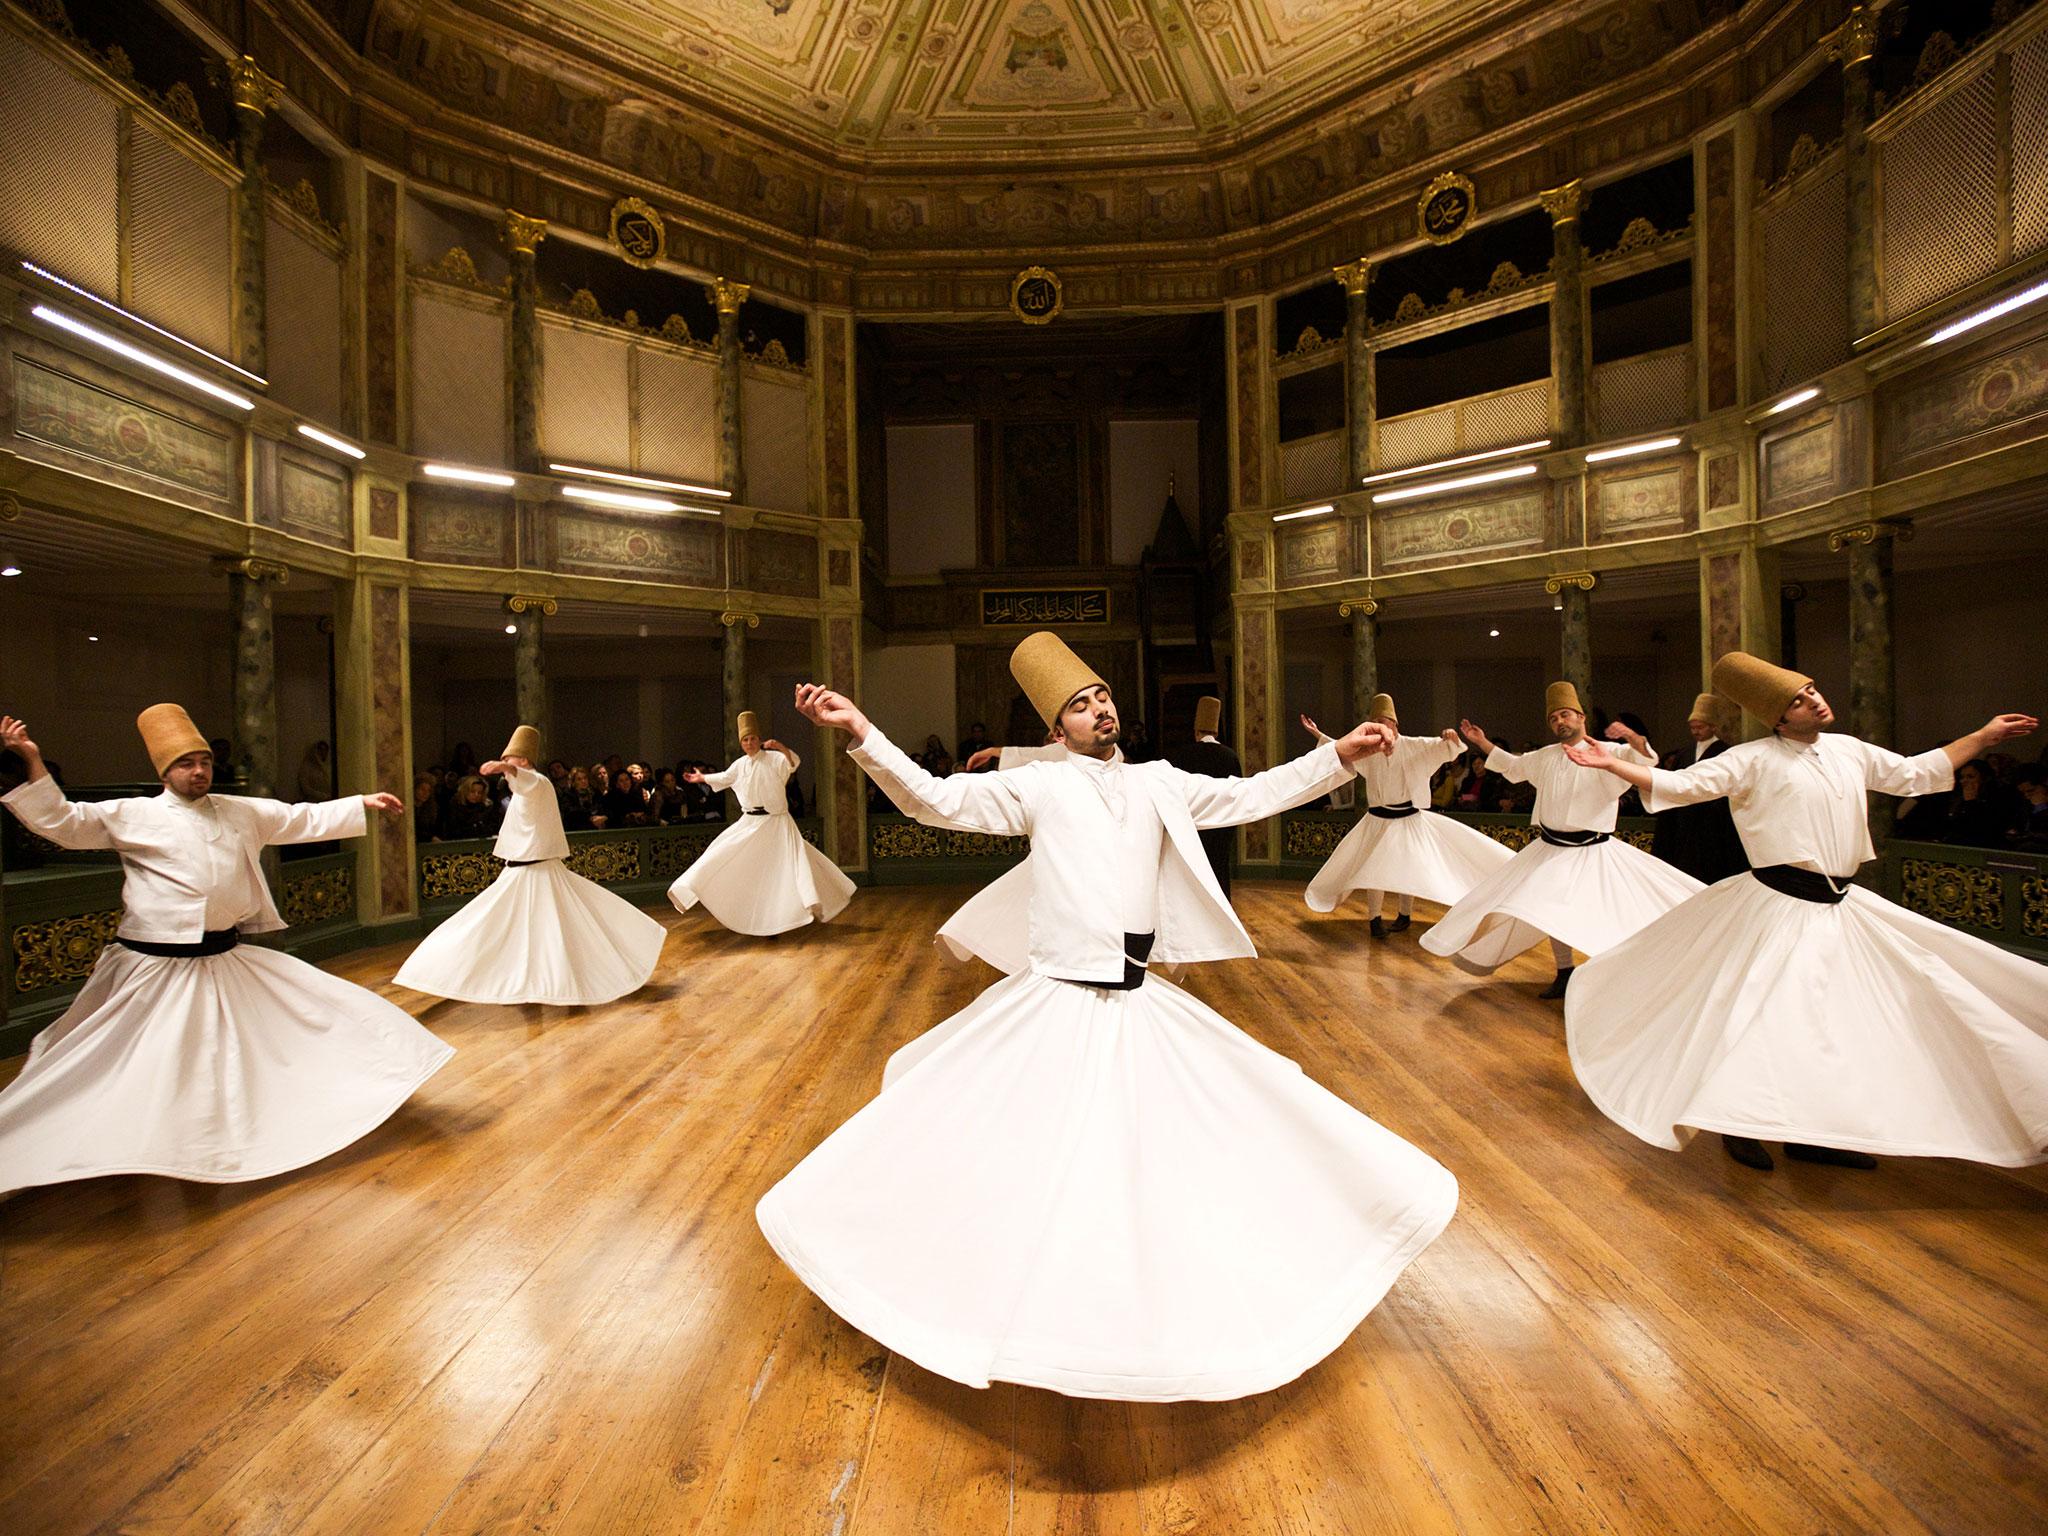 Whirling dervishes were inspired by the mystic poet Rumi